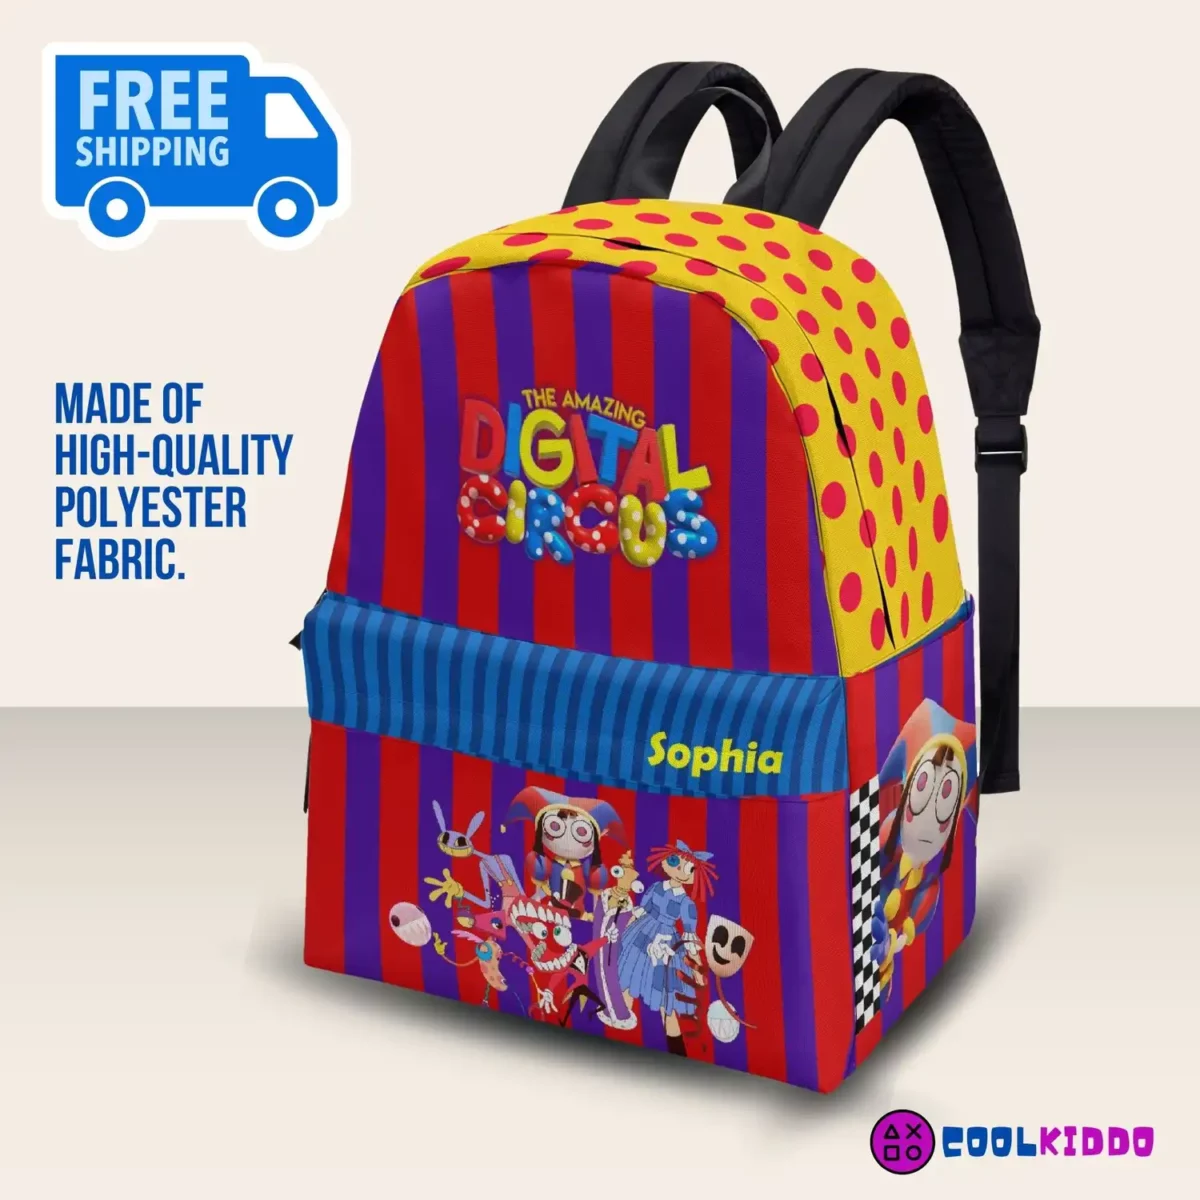 Amazing Digital Circus All-Over-Print Canvas Backpack for kids. Three Sizes School bag Cool Kiddo 10